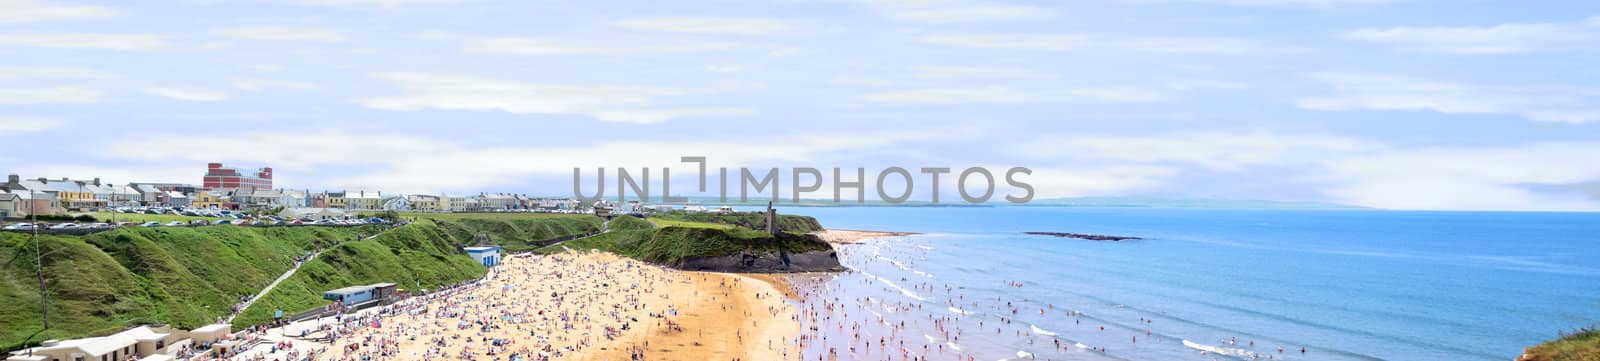 ballybunion and beach crowded with people by the cliffs on a hot day